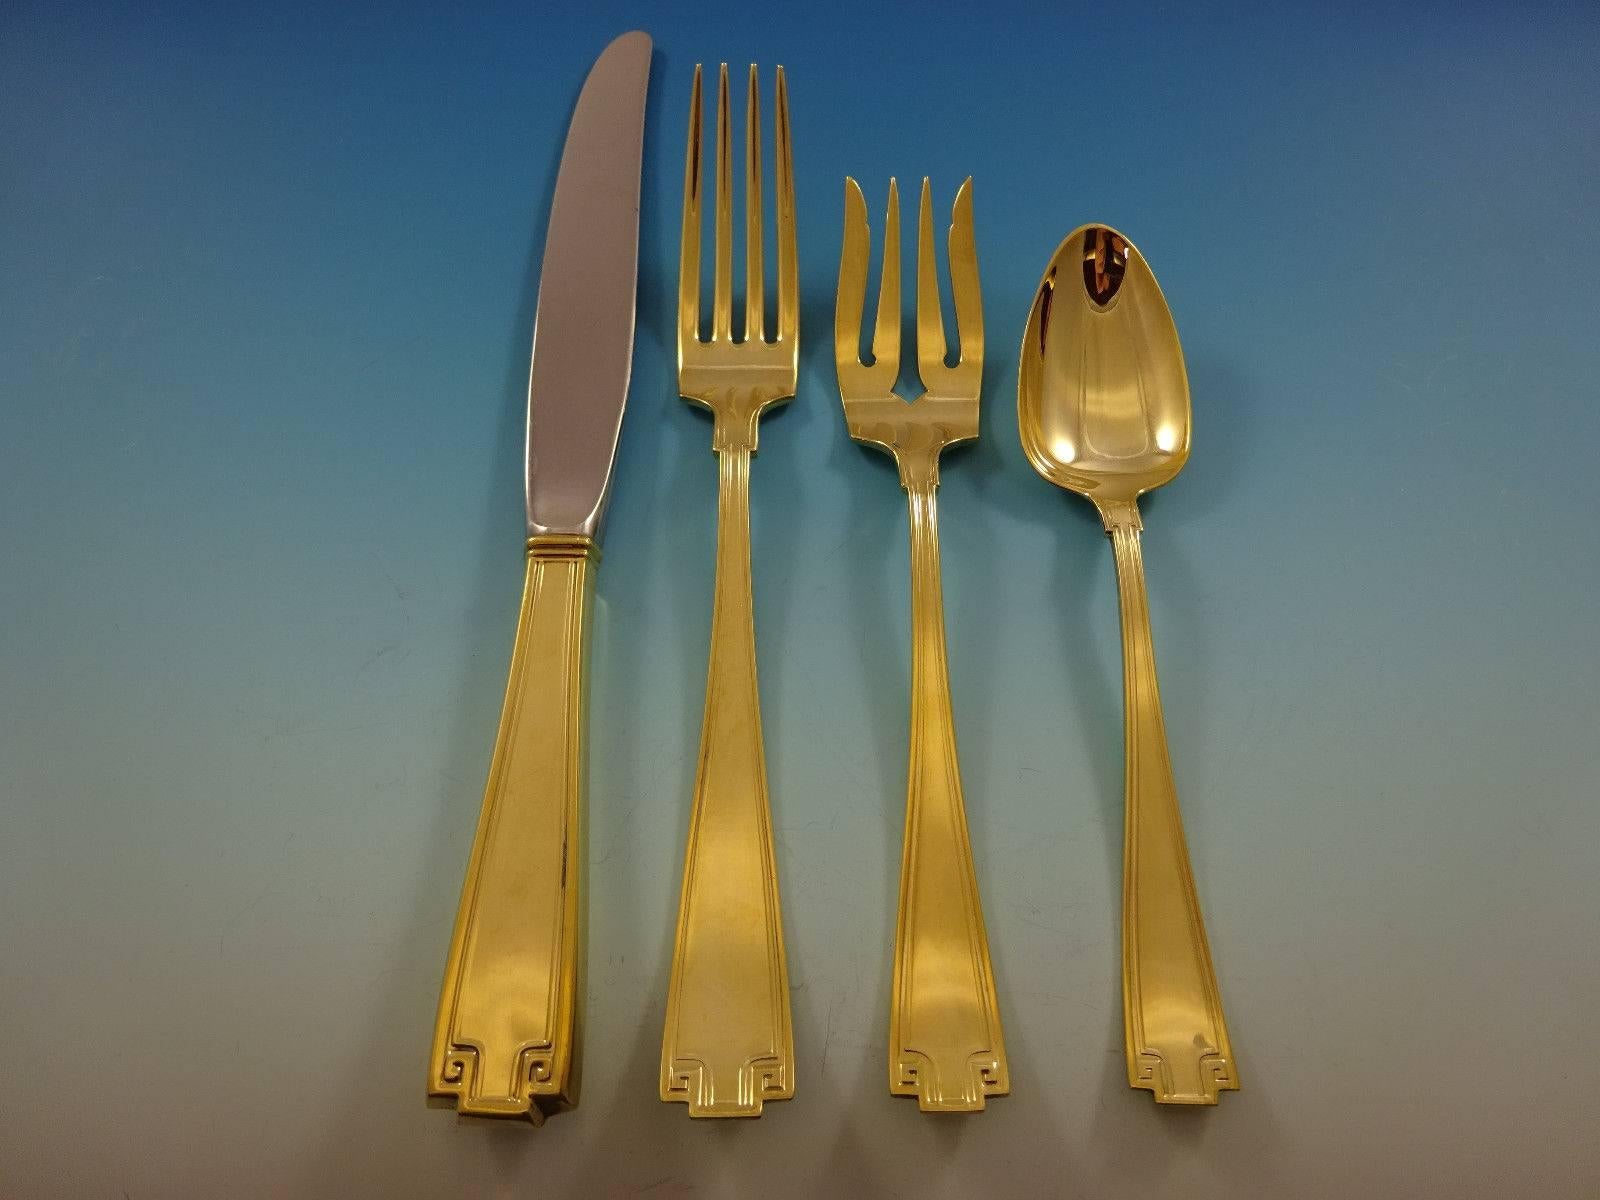 Etruscan by Gorham sterling silver flatware set of 48 pieces. 

Gold flatware is on trend and makes a bold statement on your table, especially when paired with gold rimmed china and gold accents. This set is vermeil (completely gold-washed) and